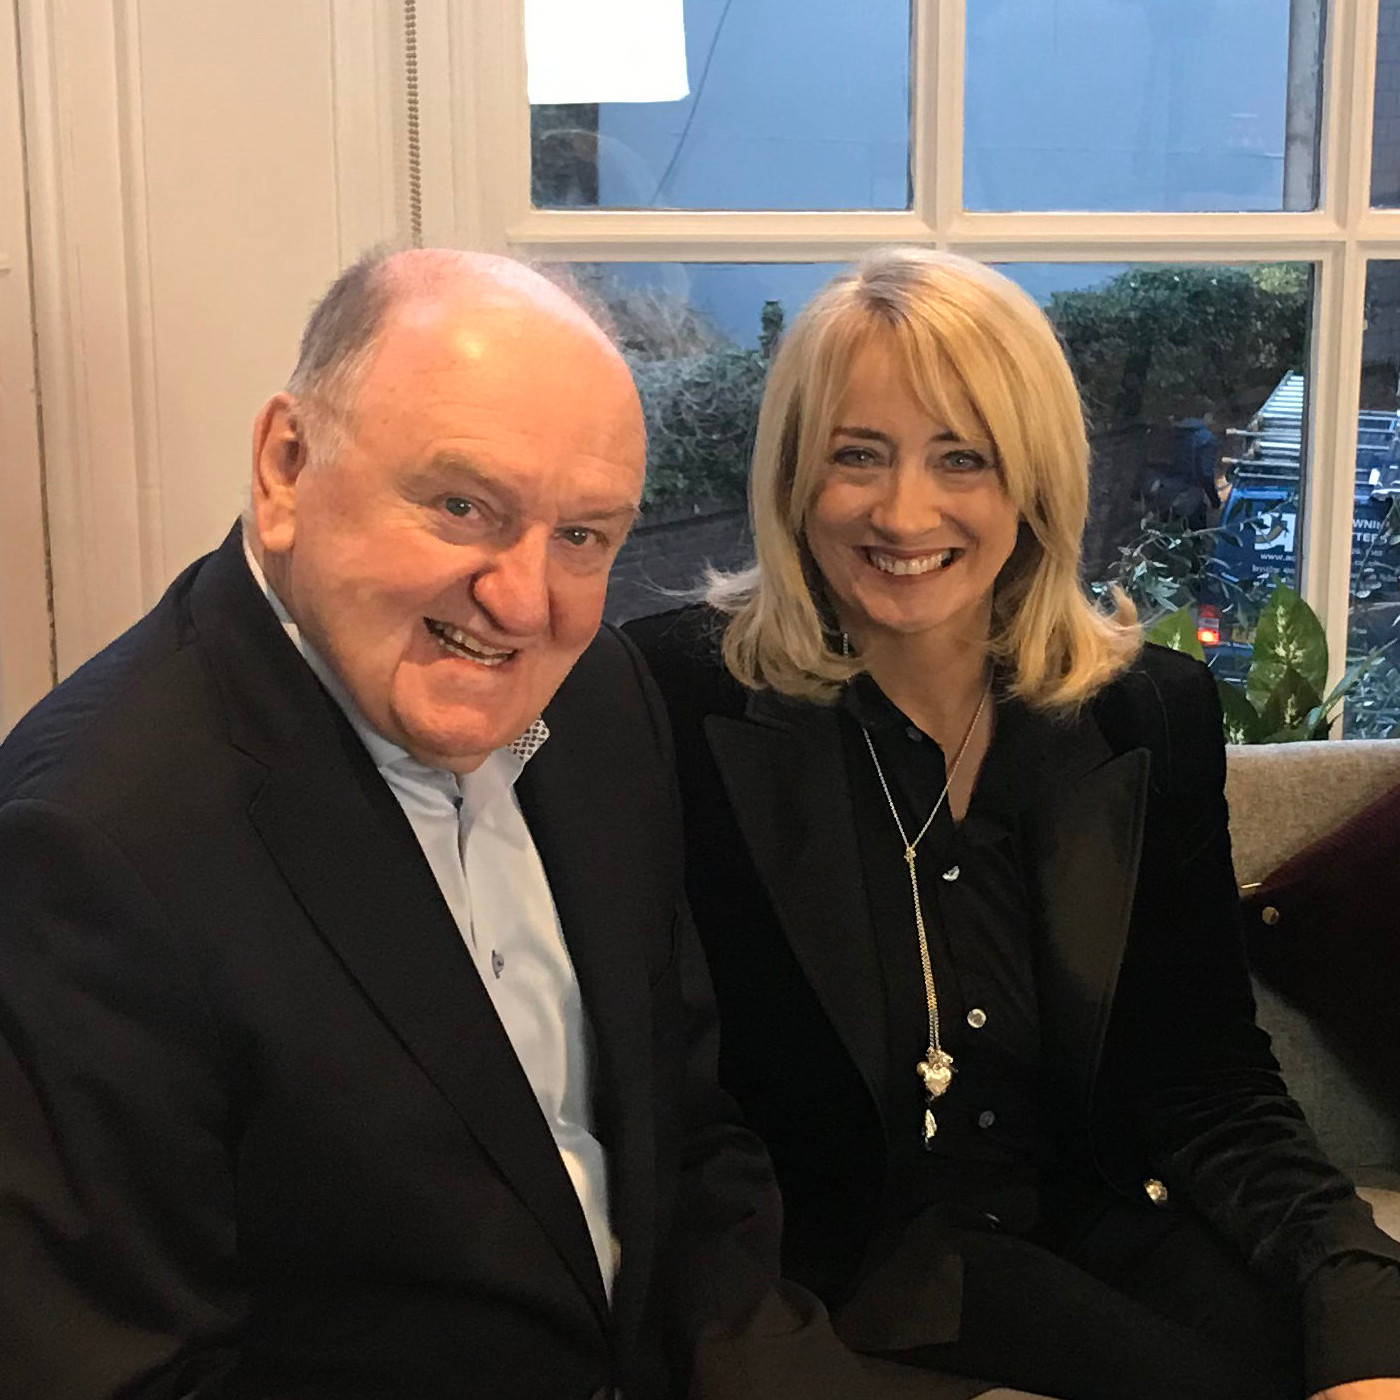 The Other Side with Theresa Lowe and guest, George Hook Sponsored by Videodoc.ie